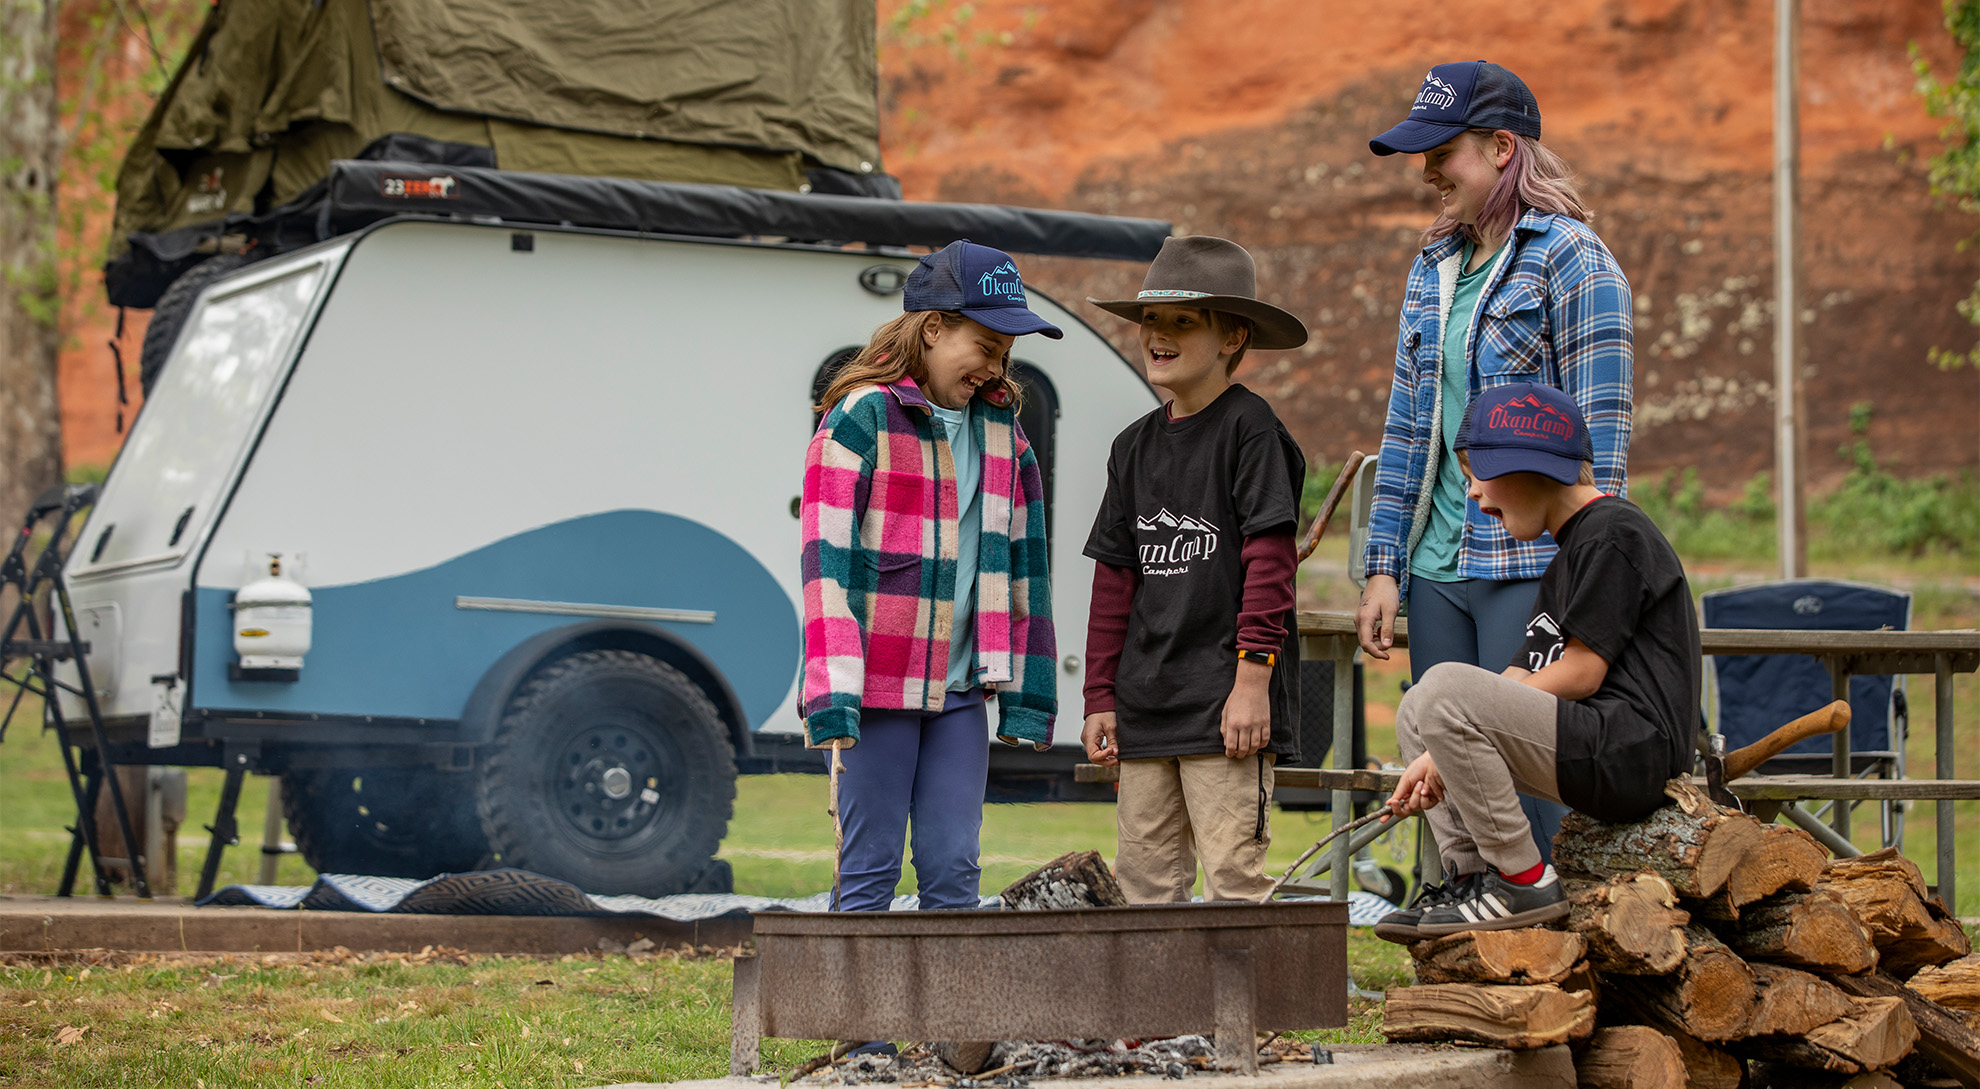 Family Camping Trip with UkanCamp Teardrop Campers